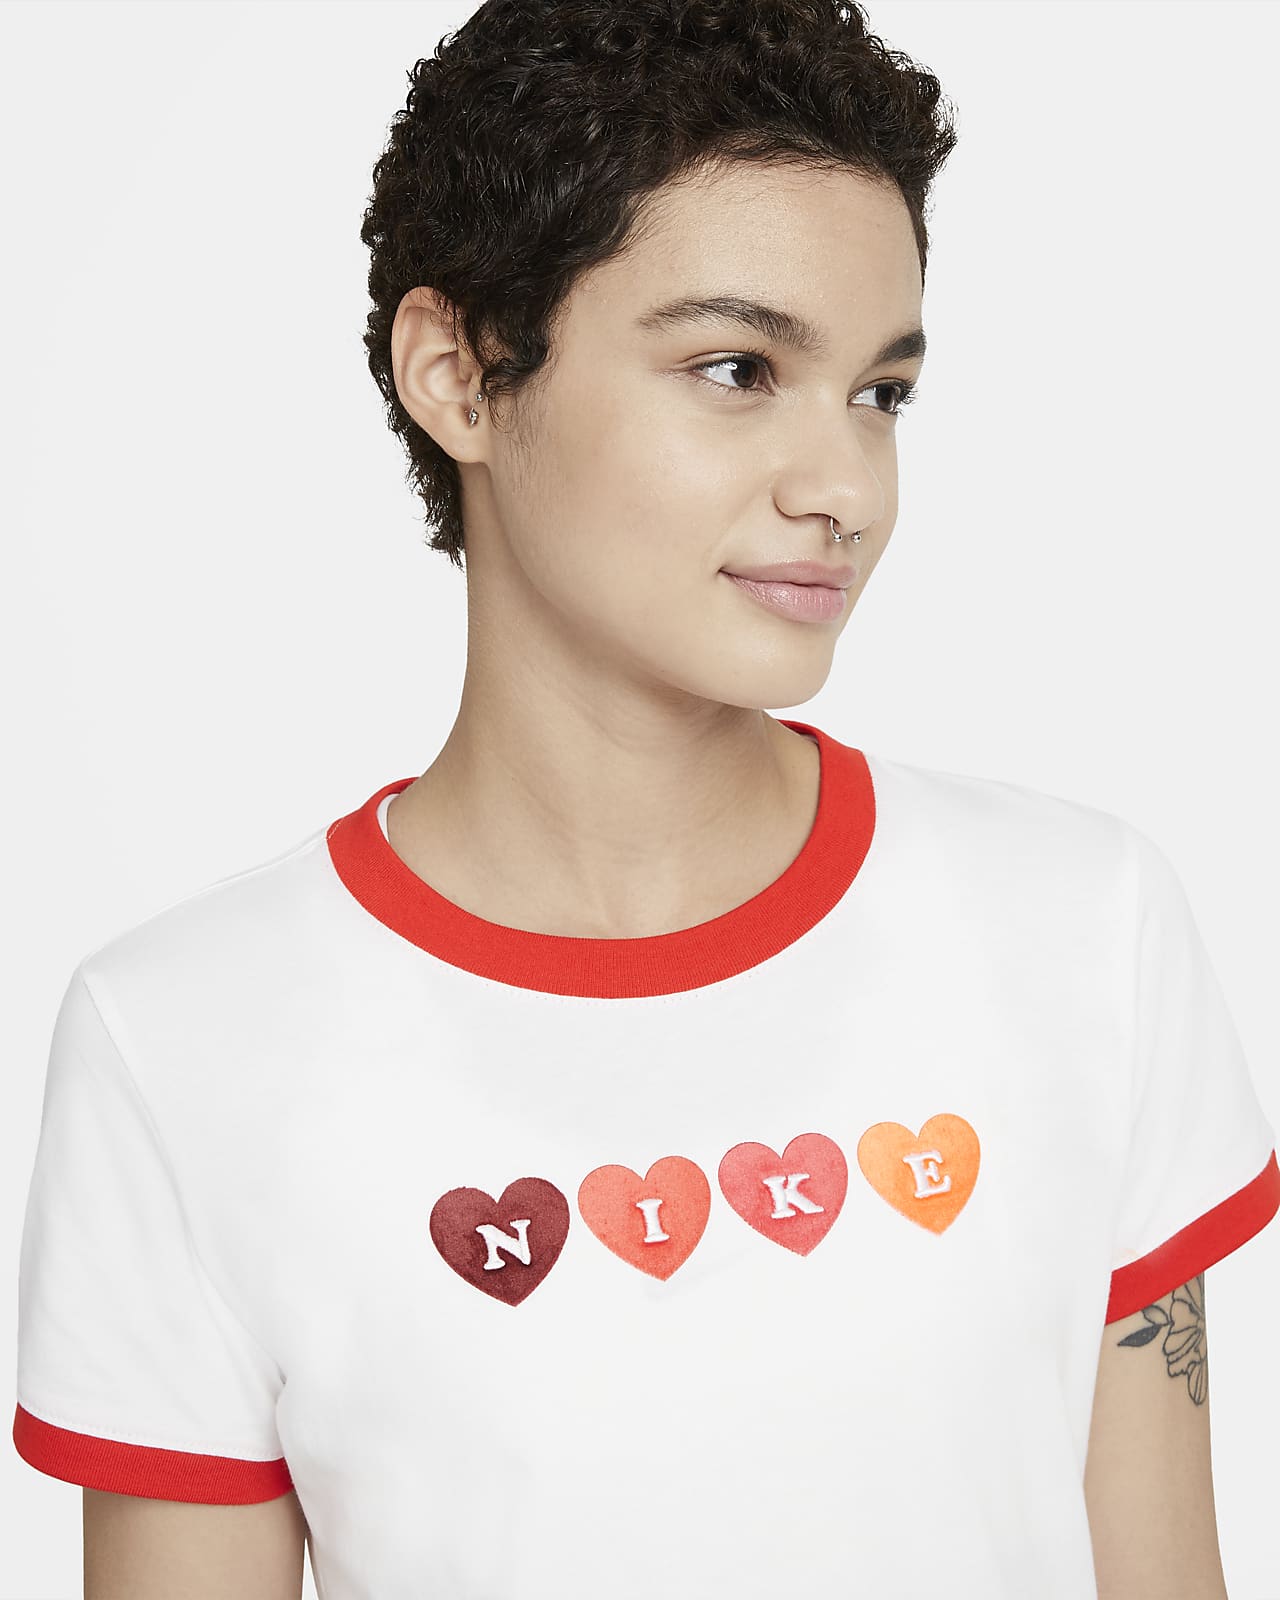 for the love of nike t shirt